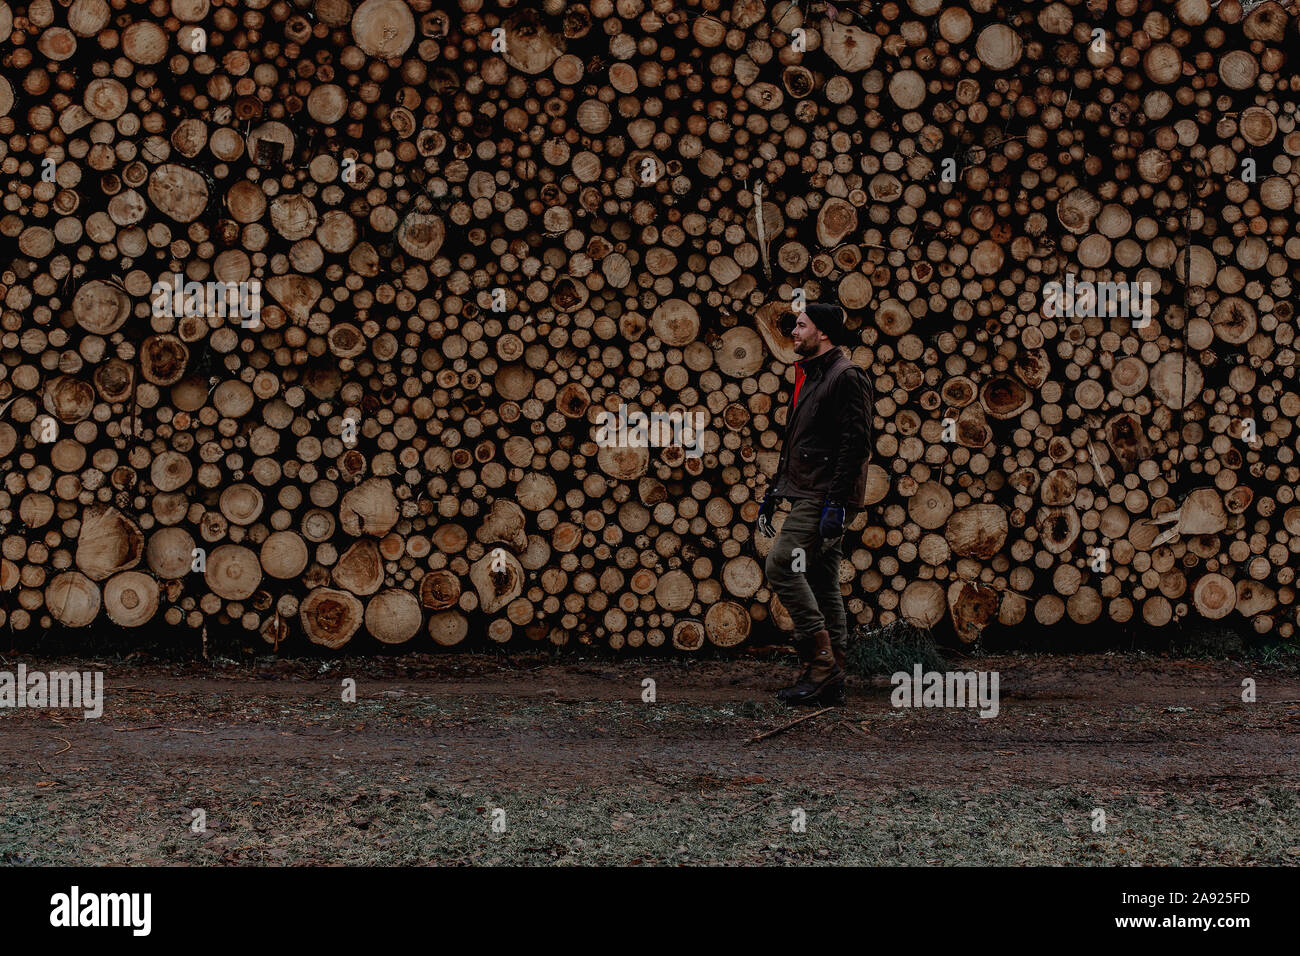 Man standing in front of stack of logs Stock Photo